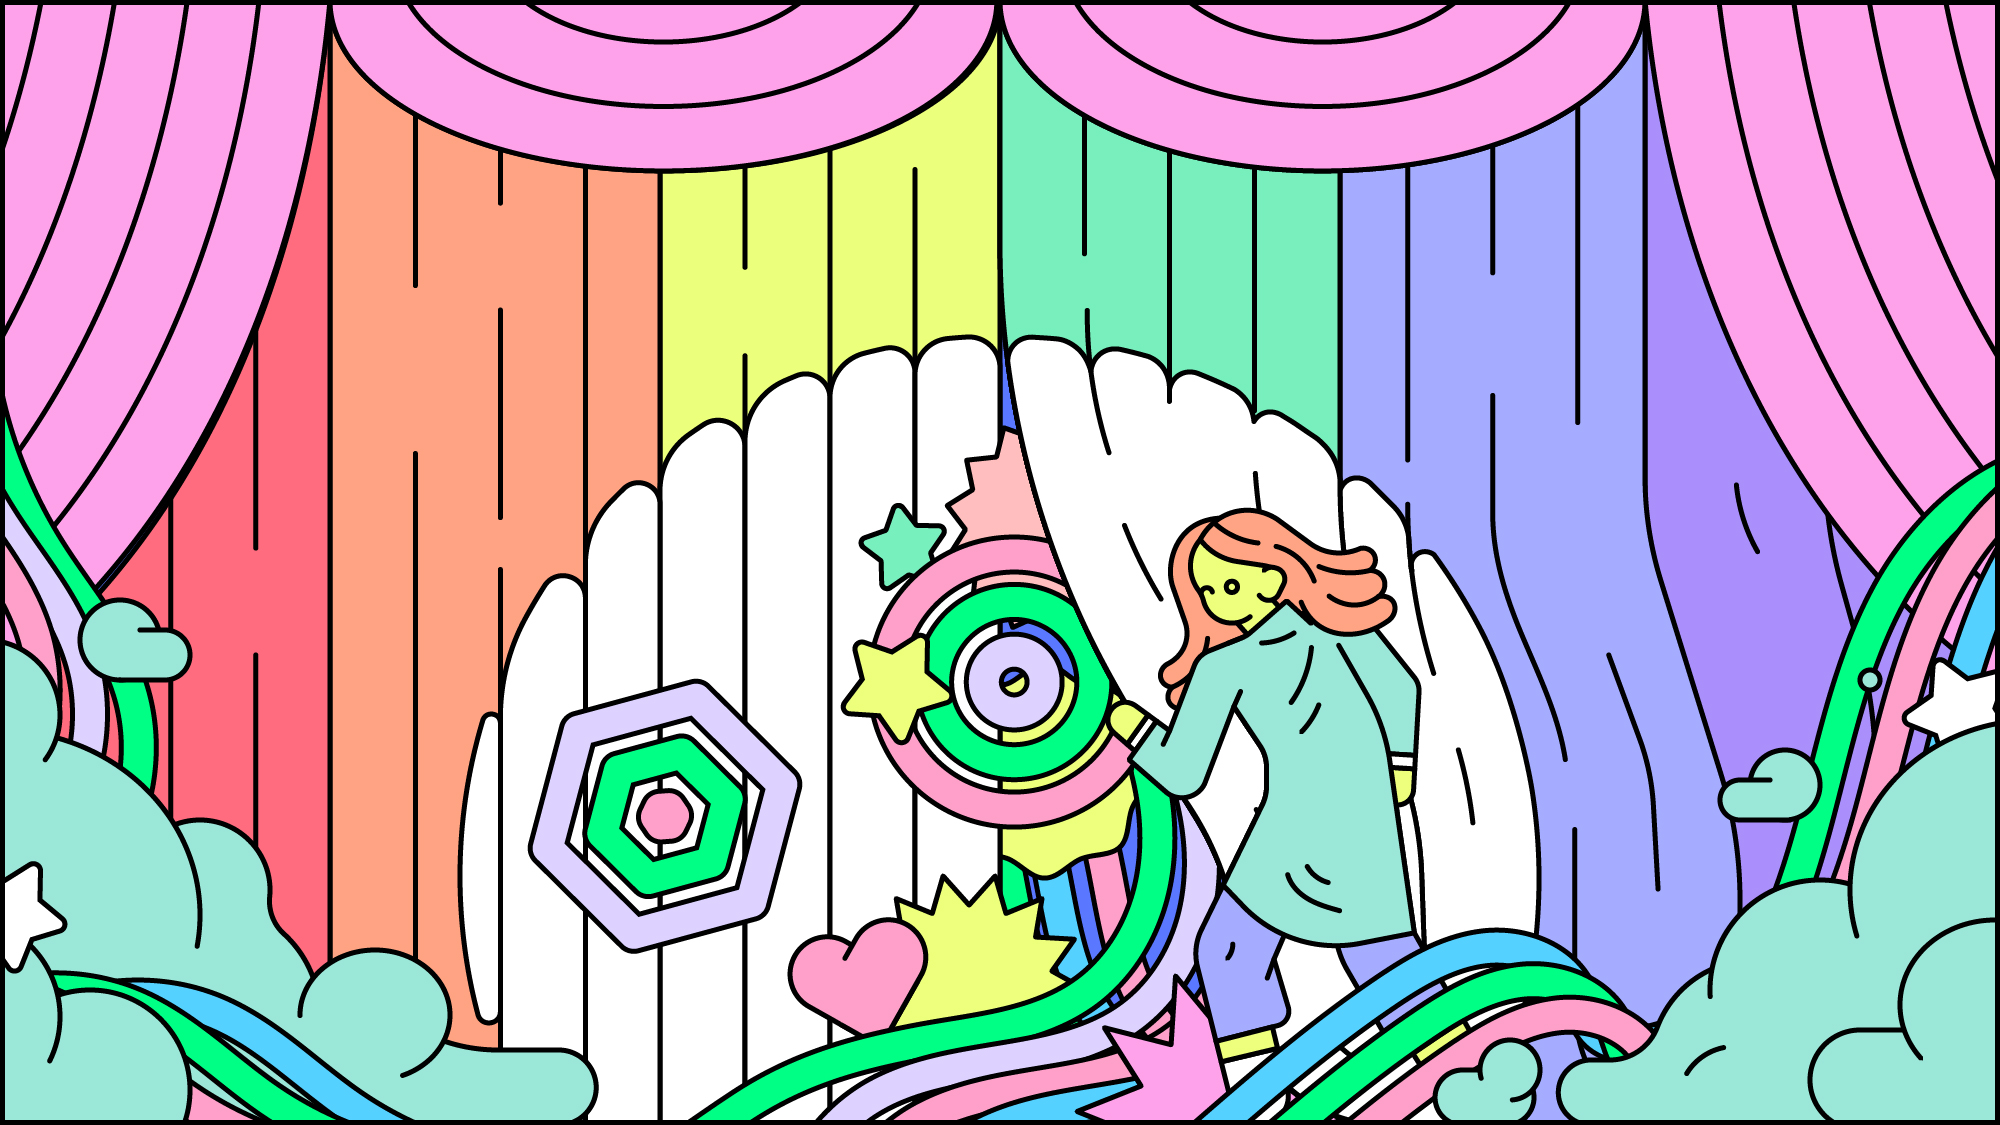 scientist pulls back stage curtain with colorful shapes behind; illustration